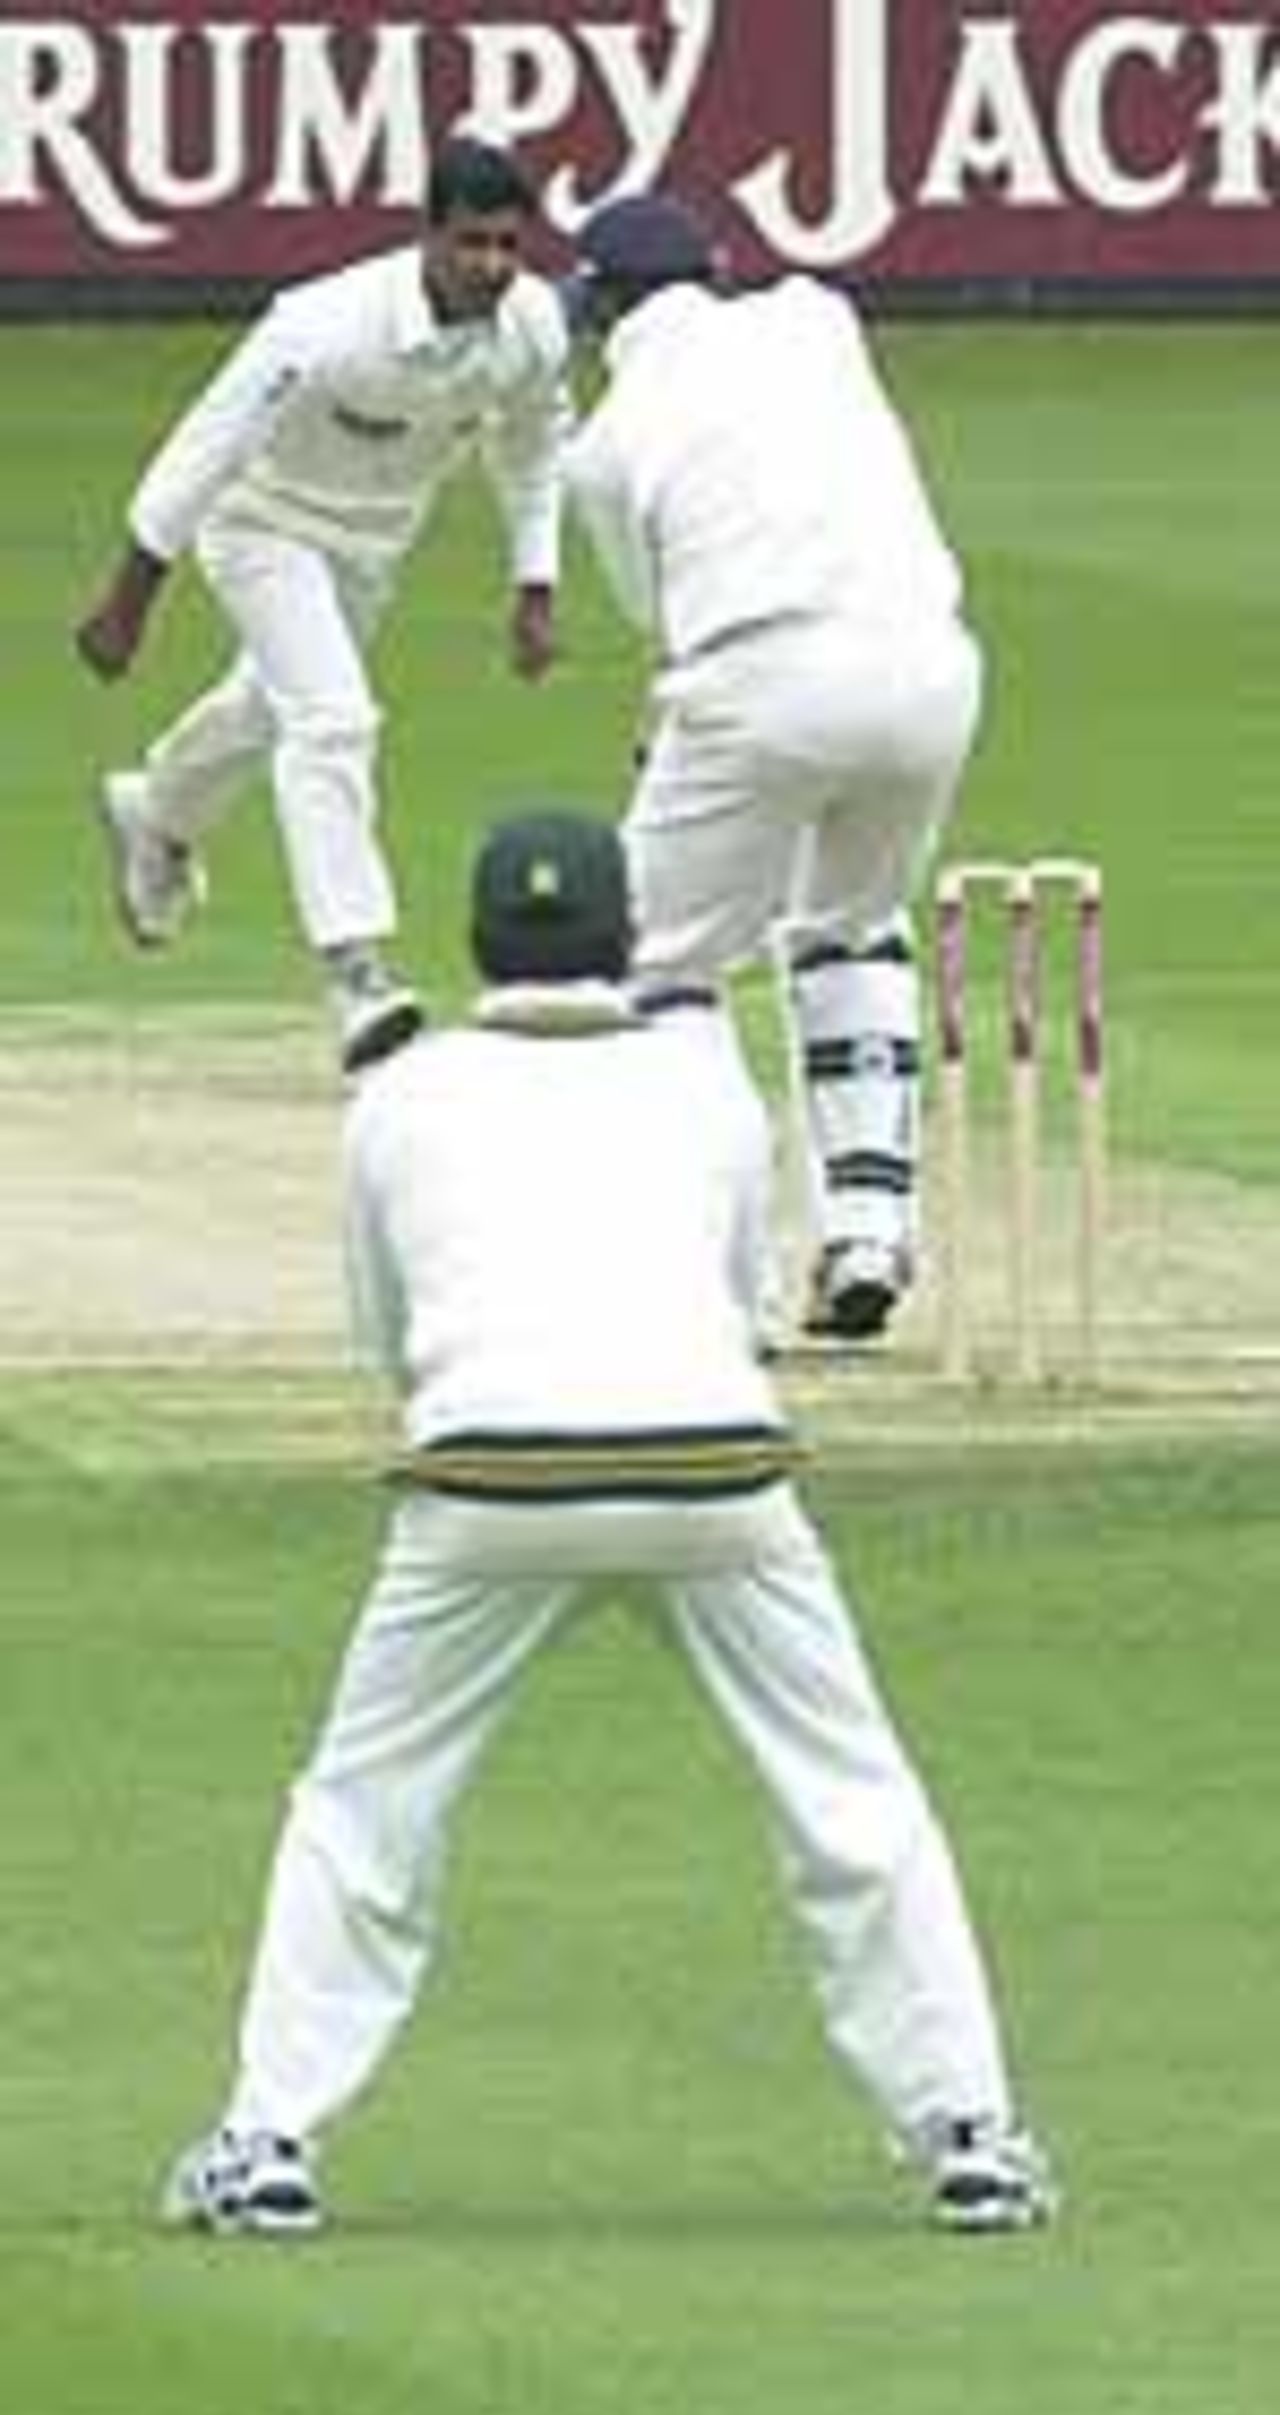 England v Pakistan Ist Test, Lords, 17-21 May 2001